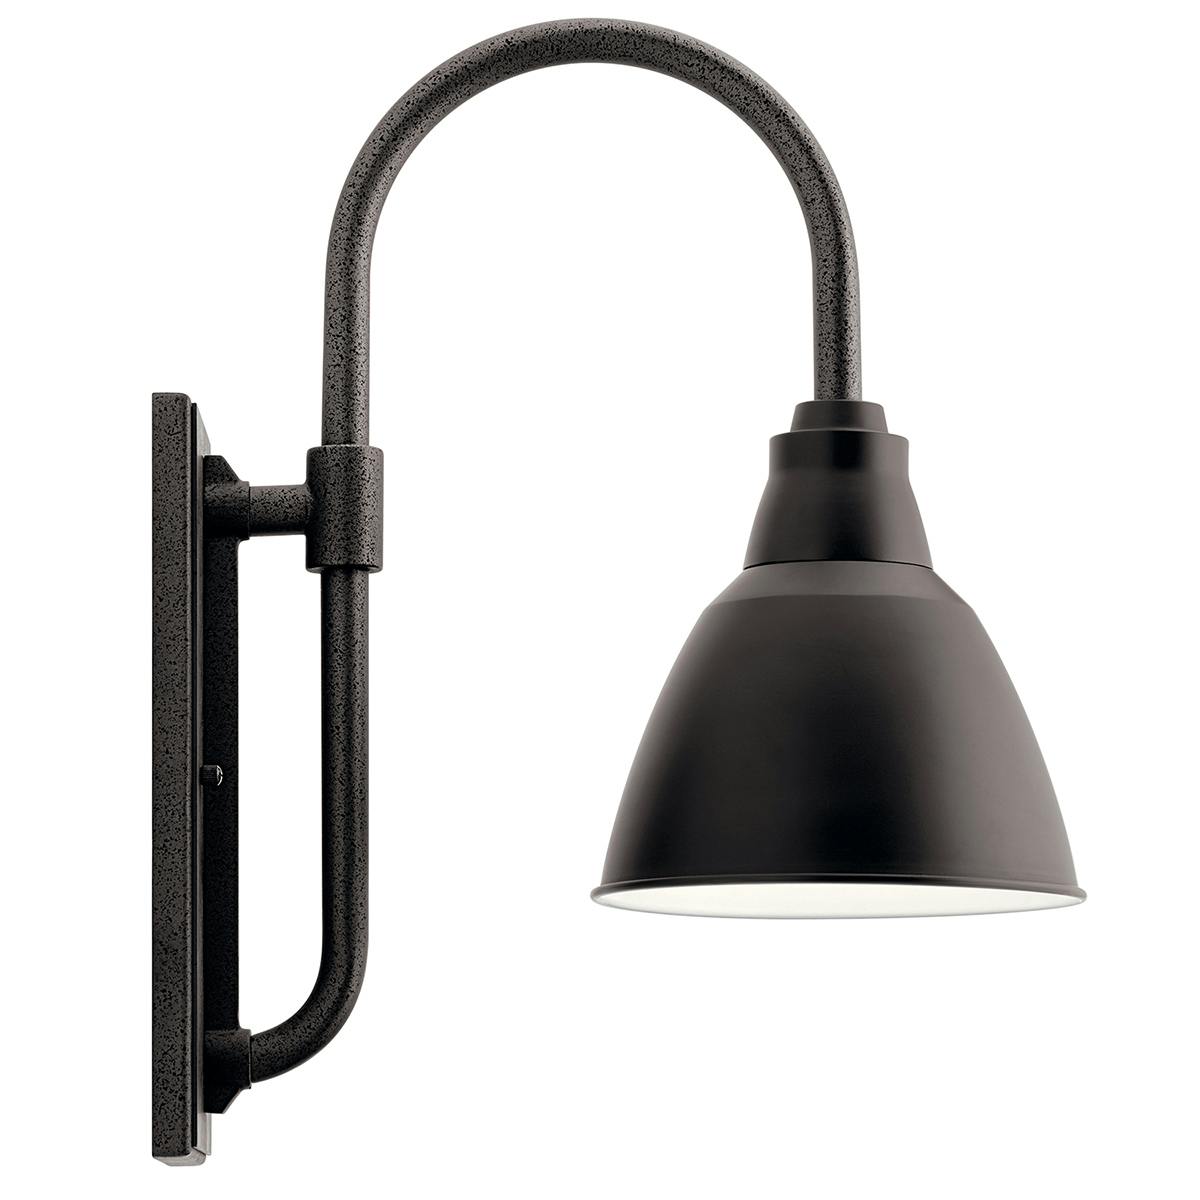 Profile view of the Pellinord™ 10" 1 Light Wall Light Black on a white background